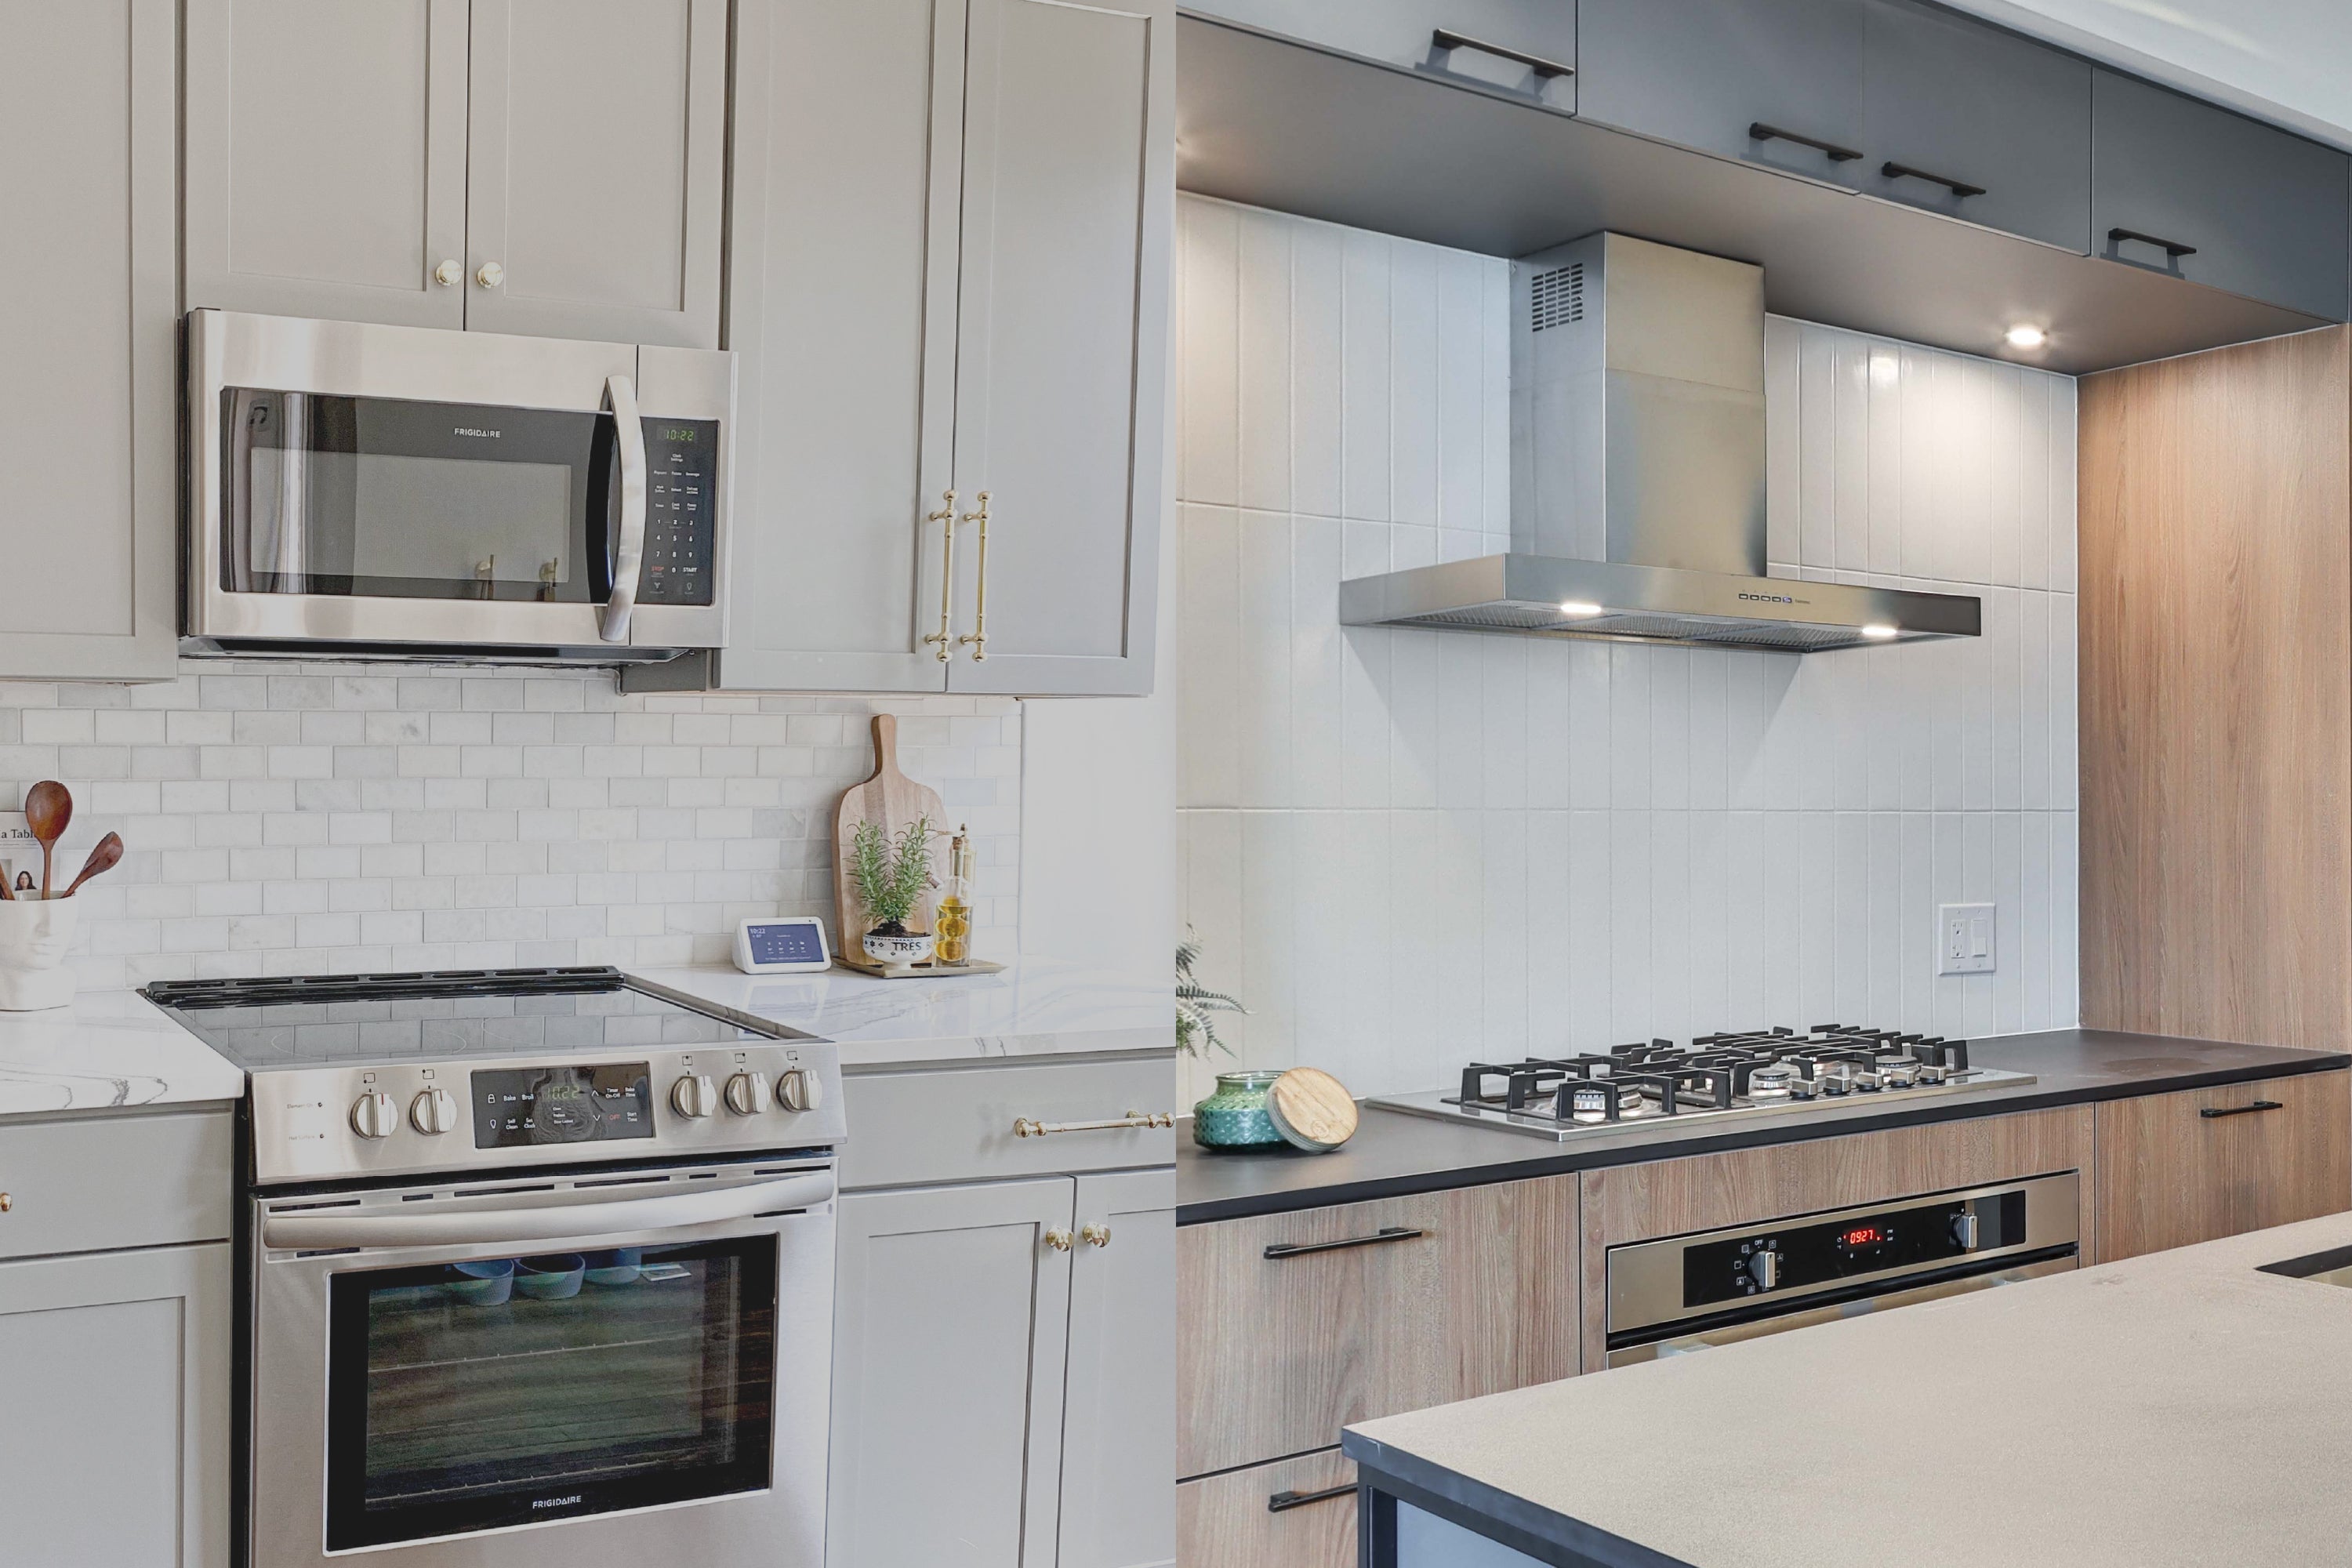 Slagter huh tyfon Pros & Cons: OTR Microwaves With Exhaust Fans vs. Range Hoods